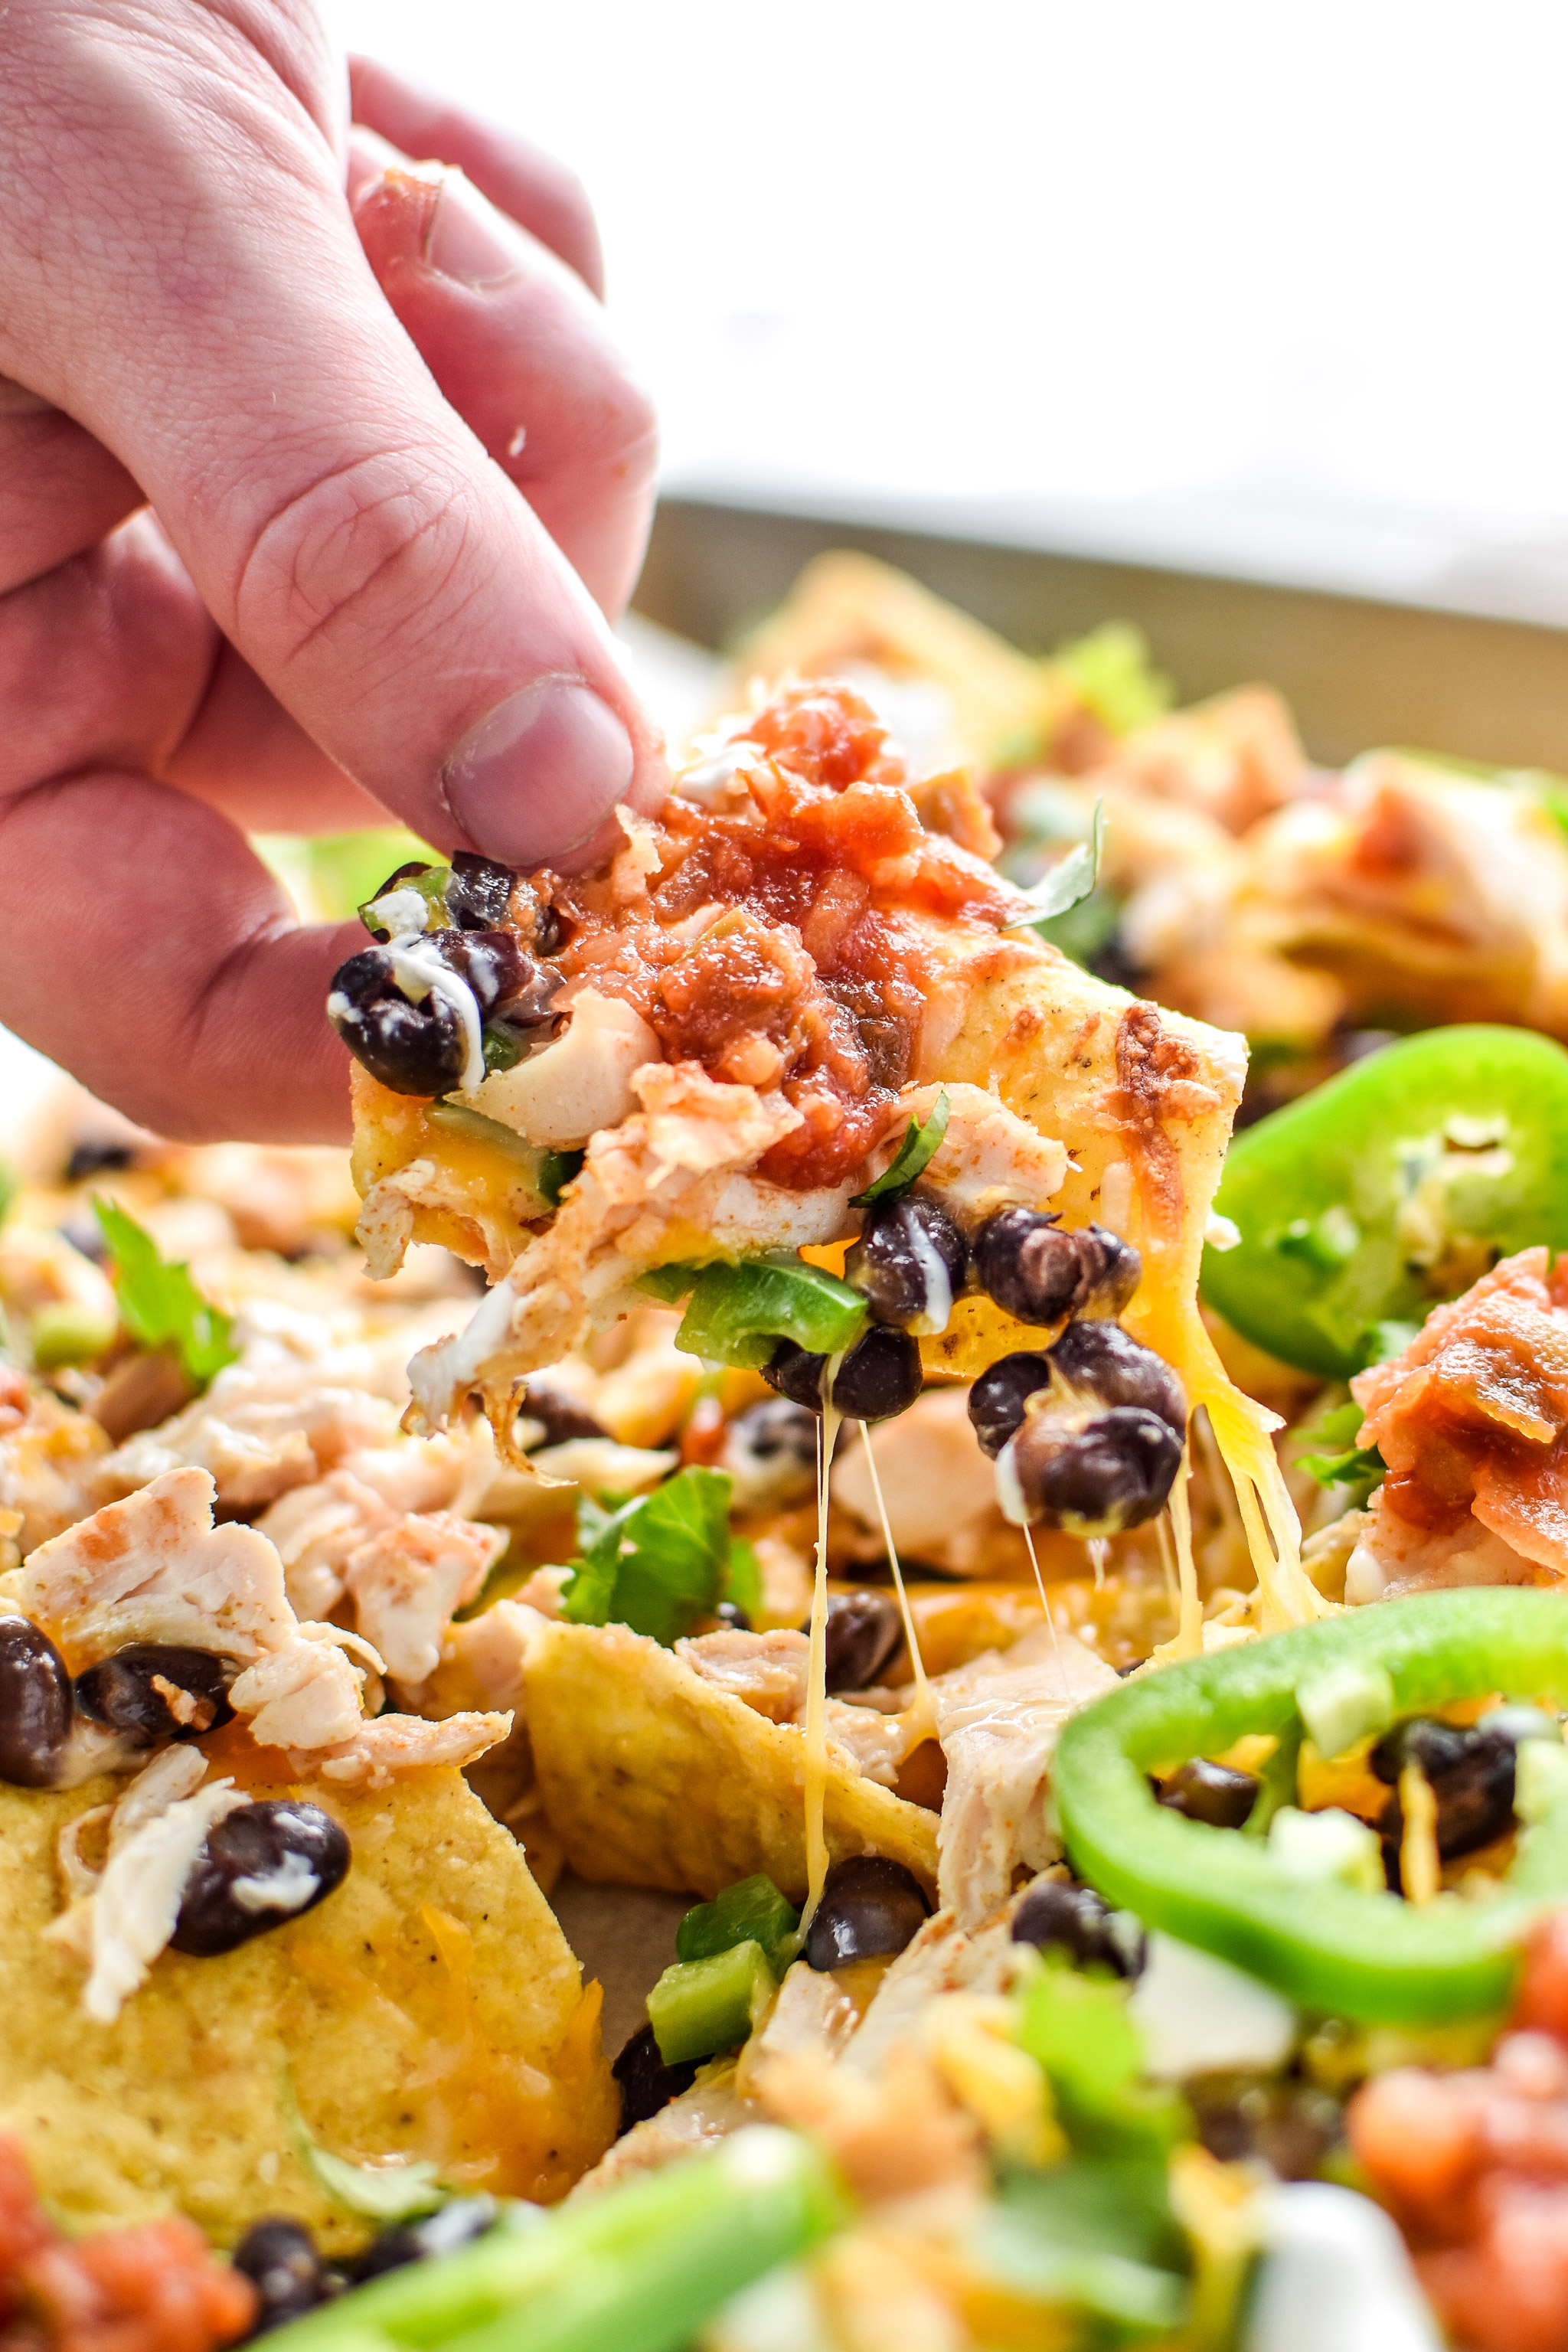 Taking a chip from the prep ahead rotisserie chicken nachos sheet pan. Yummy!